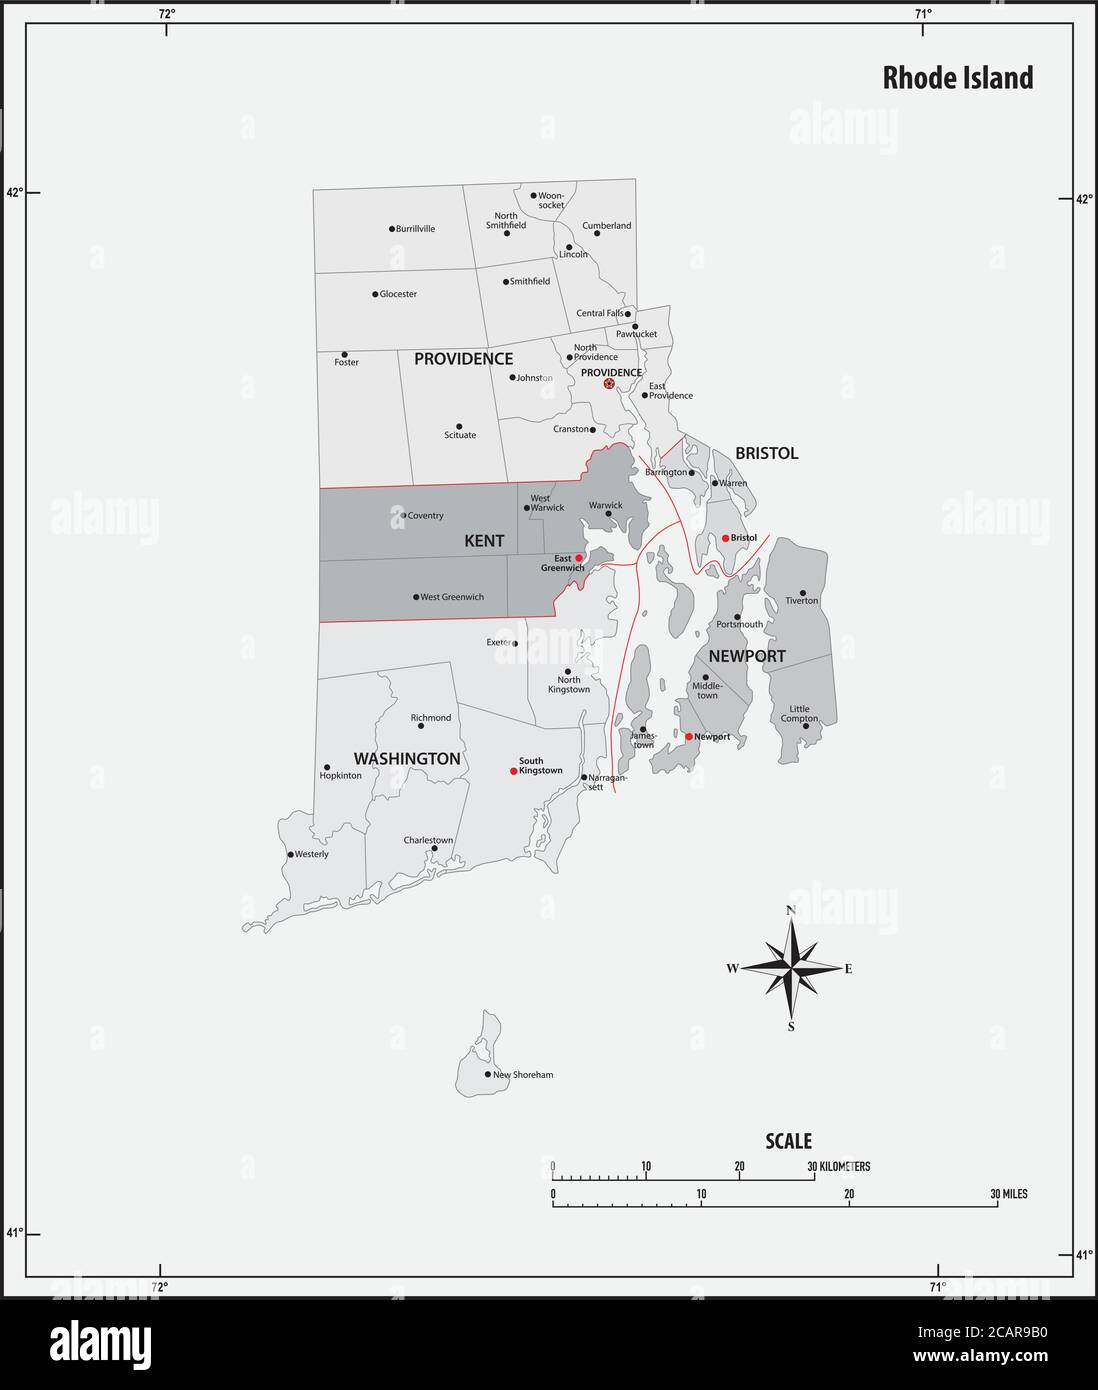 rhode island state outline administrative and political vector map in black and white Stock Vector